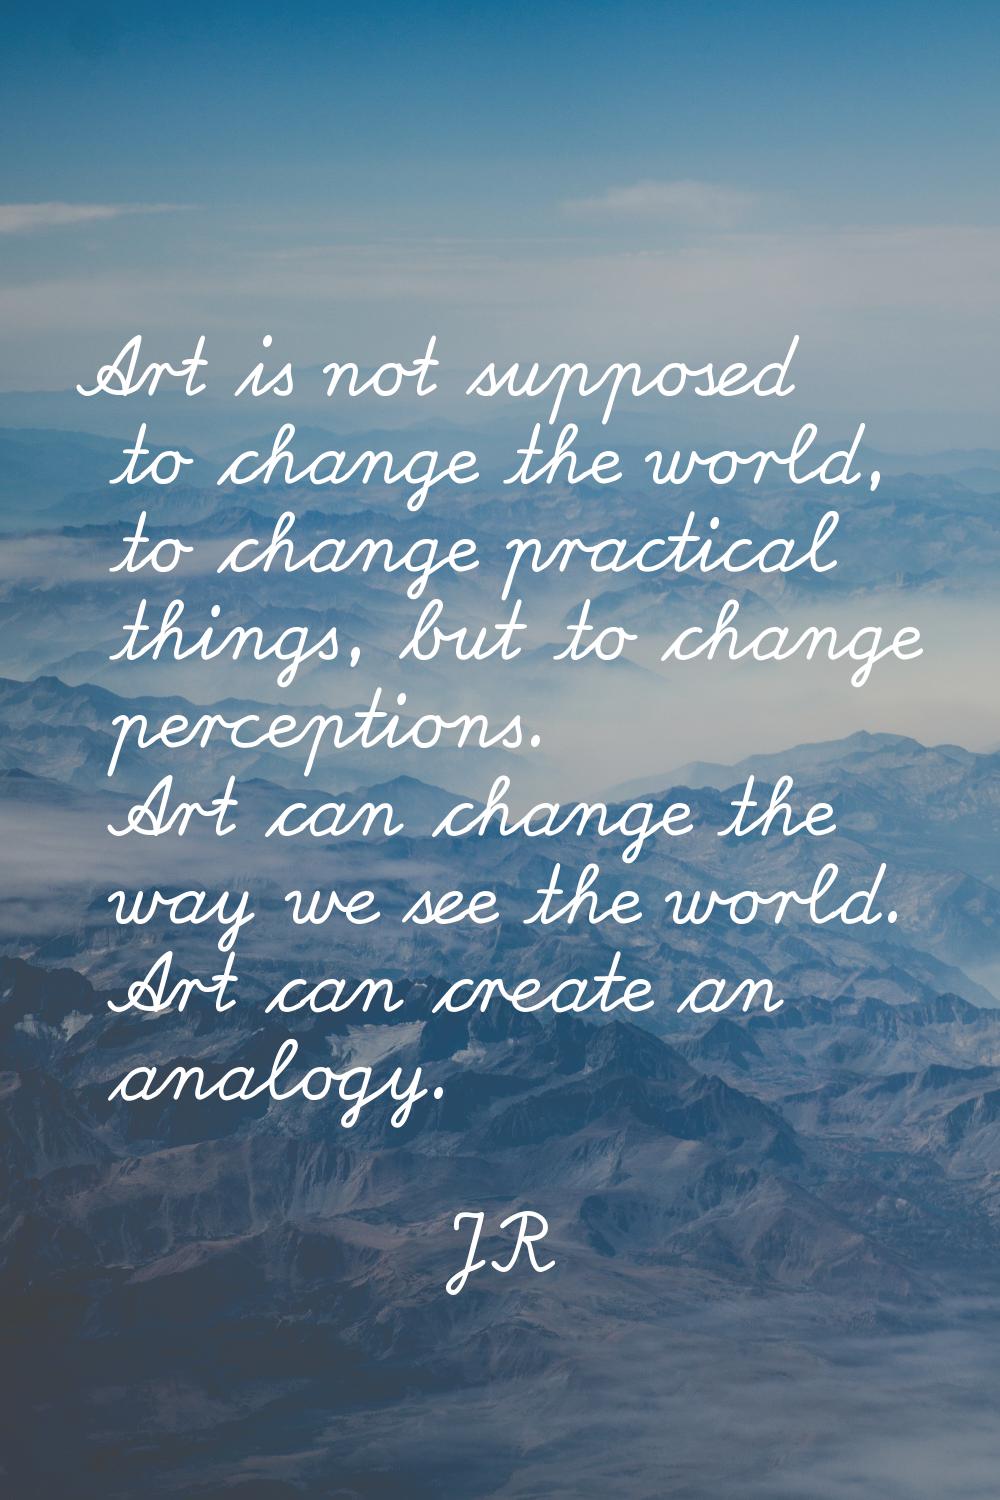 Art is not supposed to change the world, to change practical things, but to change perceptions. Art